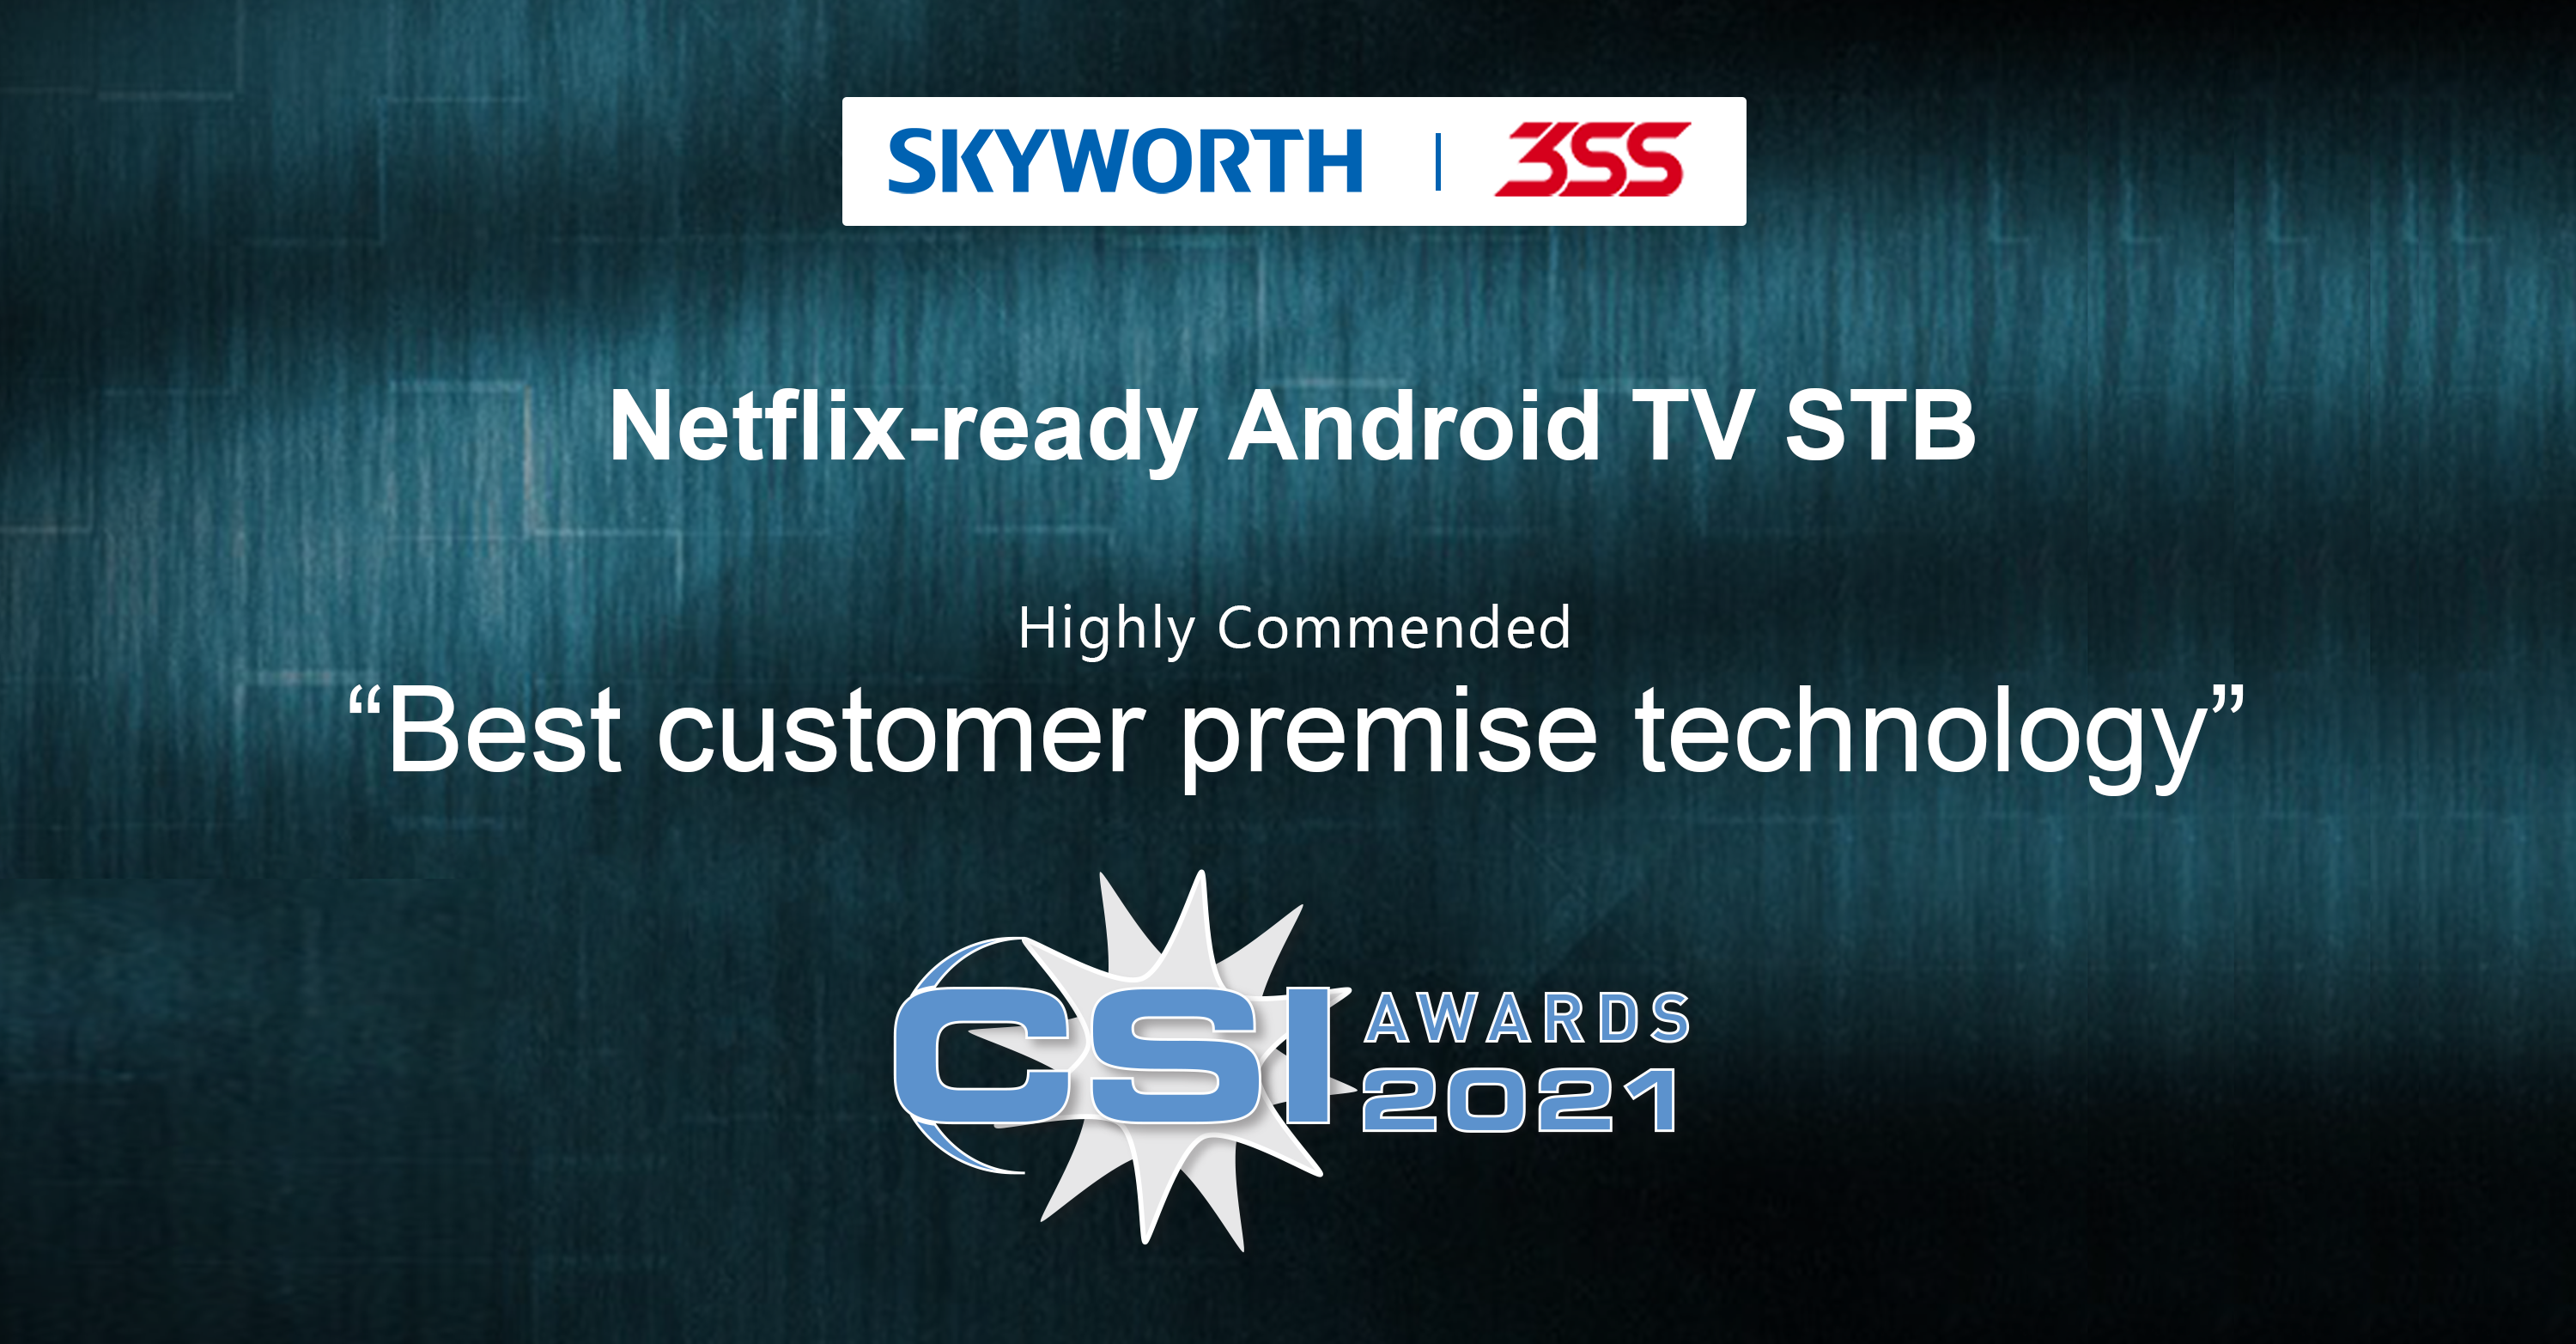 Netflix-ready Android TV STB “Highly Commended” by CSI Awards 2021